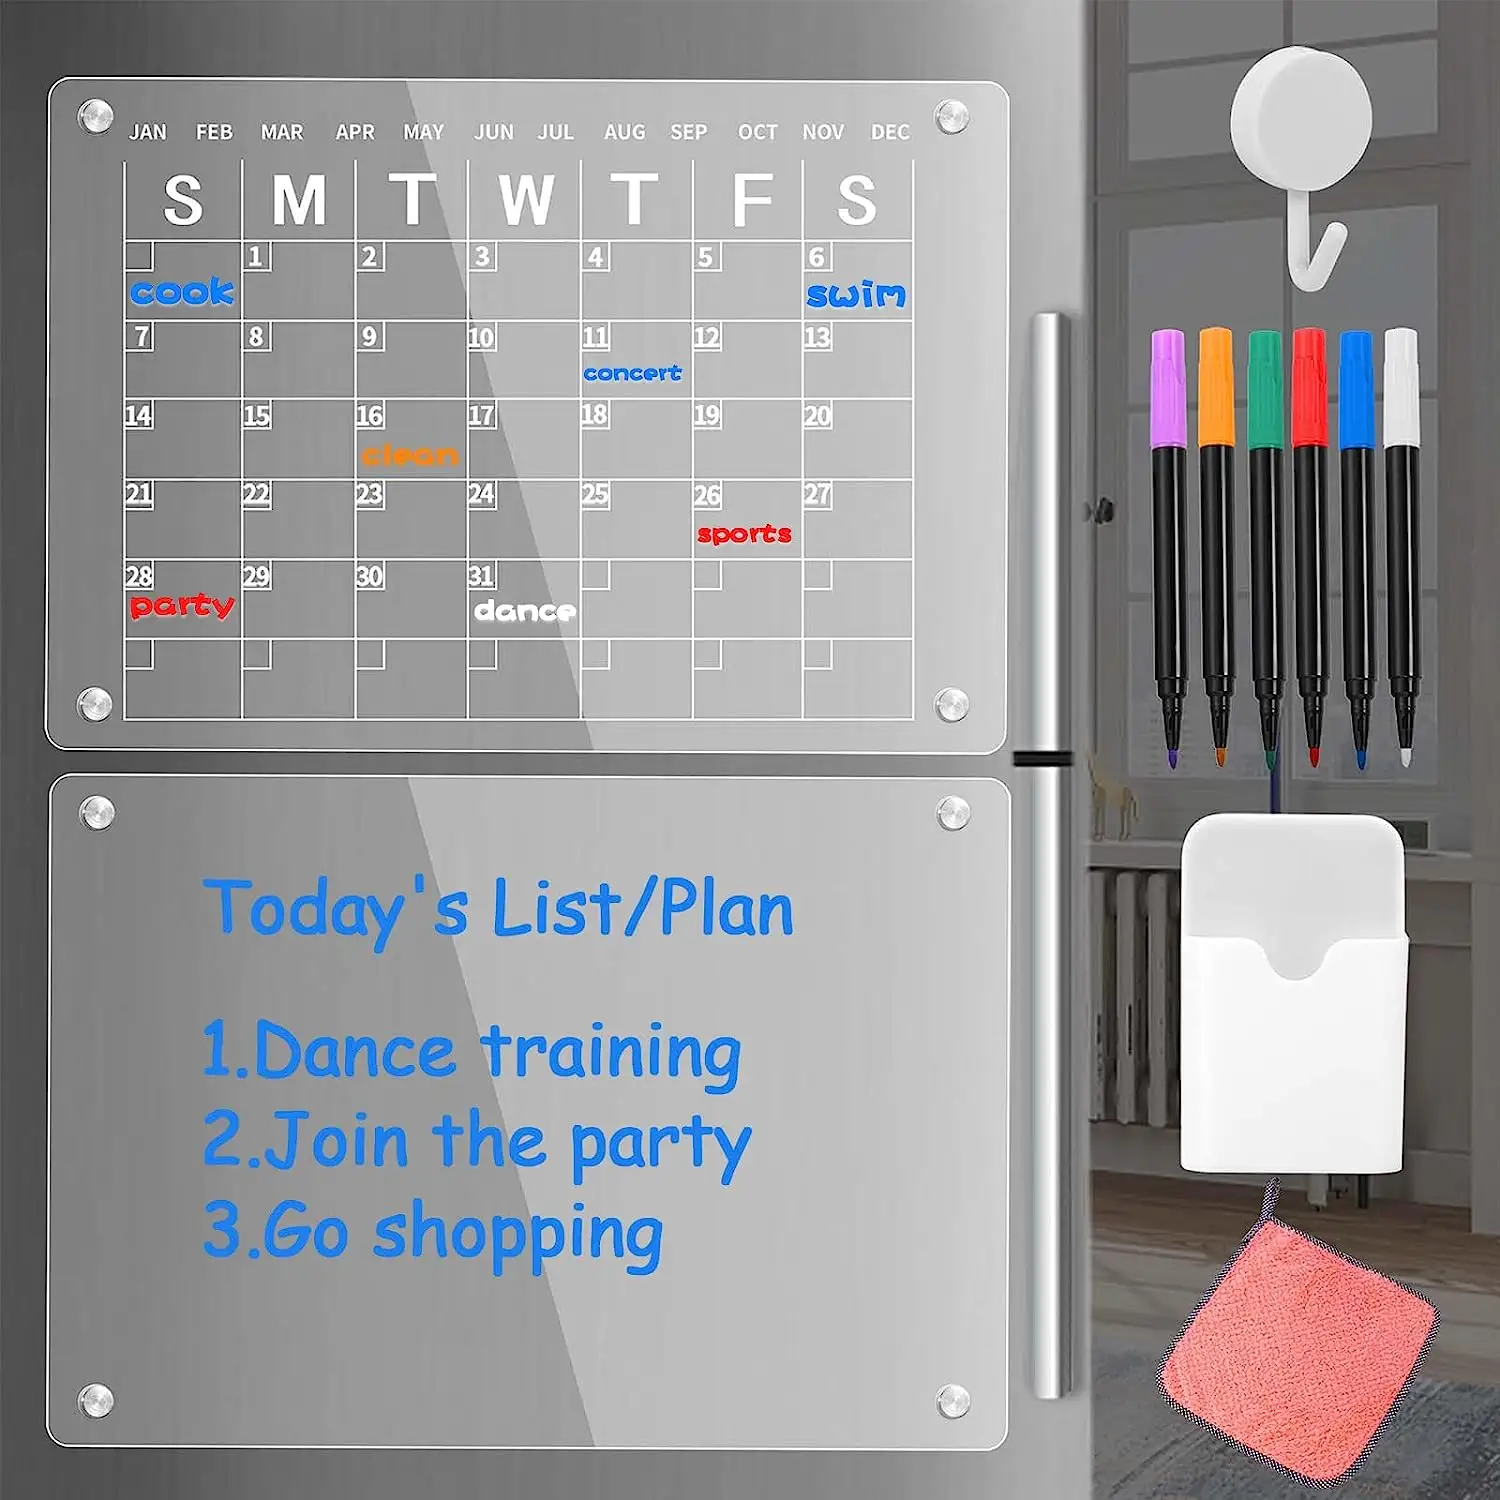 Clear Dry Erase Calendar Board with 6 Markers, Pen Holder, Rag and Hooks - 16''x12'